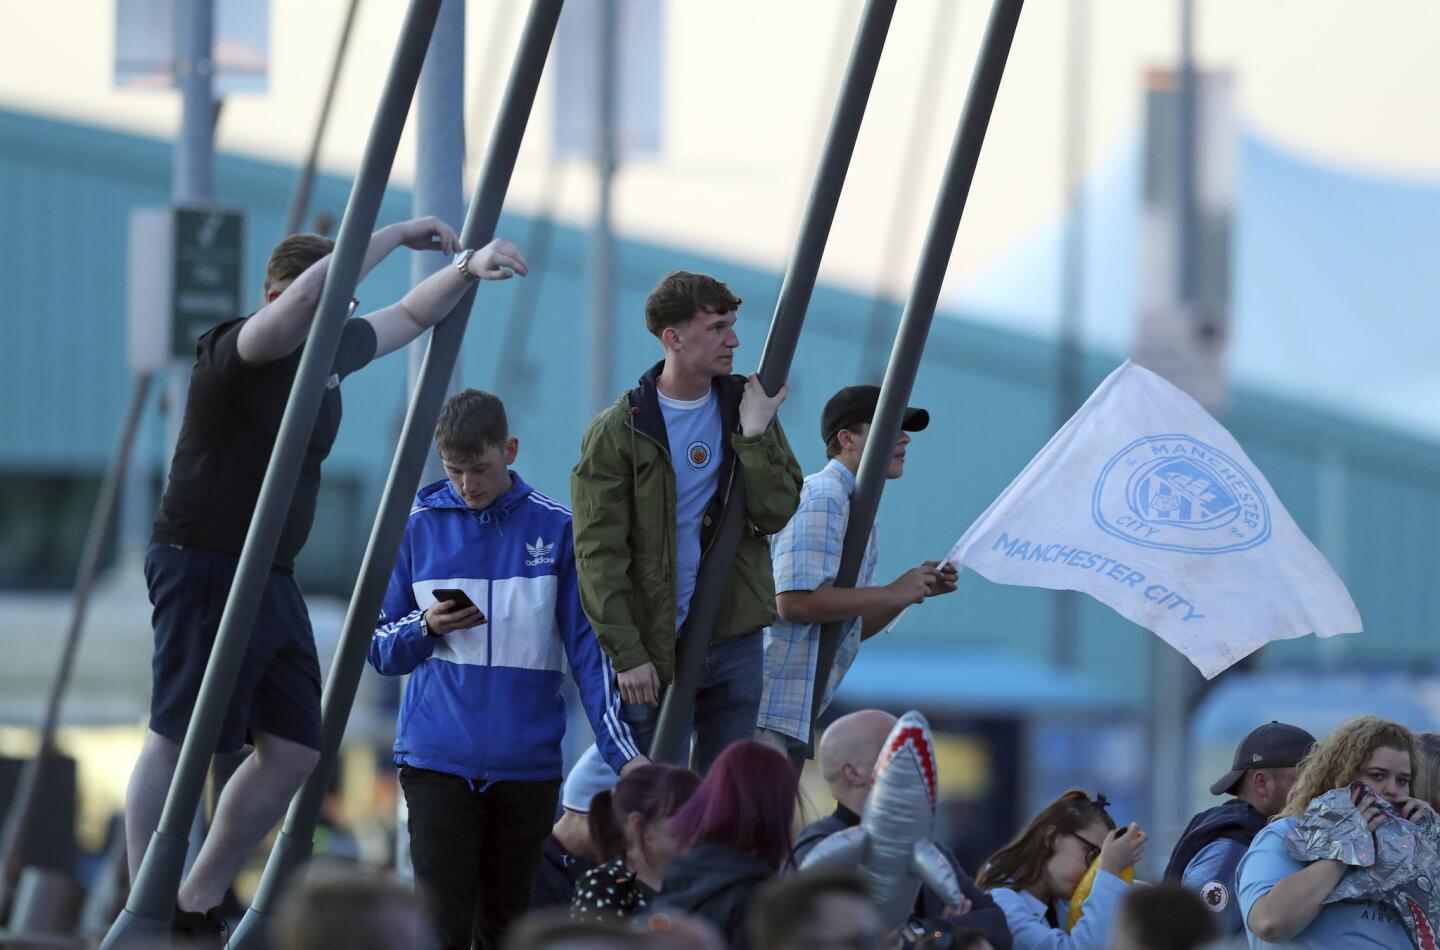 Manchester City supporters gather as they await the arrival of the team to celebrate at the team's Etihad Stadium the day they won the English Premier League title, in Manchester, England, Sunday May 12, 2019. Manchester City retained the Premier League trophy after coming from behind to beat Brighton 4-1 and see off Liverpool's relentless challenge on the final day of the season on Sunday. The quality and intensity of the title race was emphasized by City requiring a 14th successive league victory to finish a point above a Liverpool side chasing a first championship crown in 29 years as the top two finished with a record 195 points combined.(AP Photo/Jon Super)